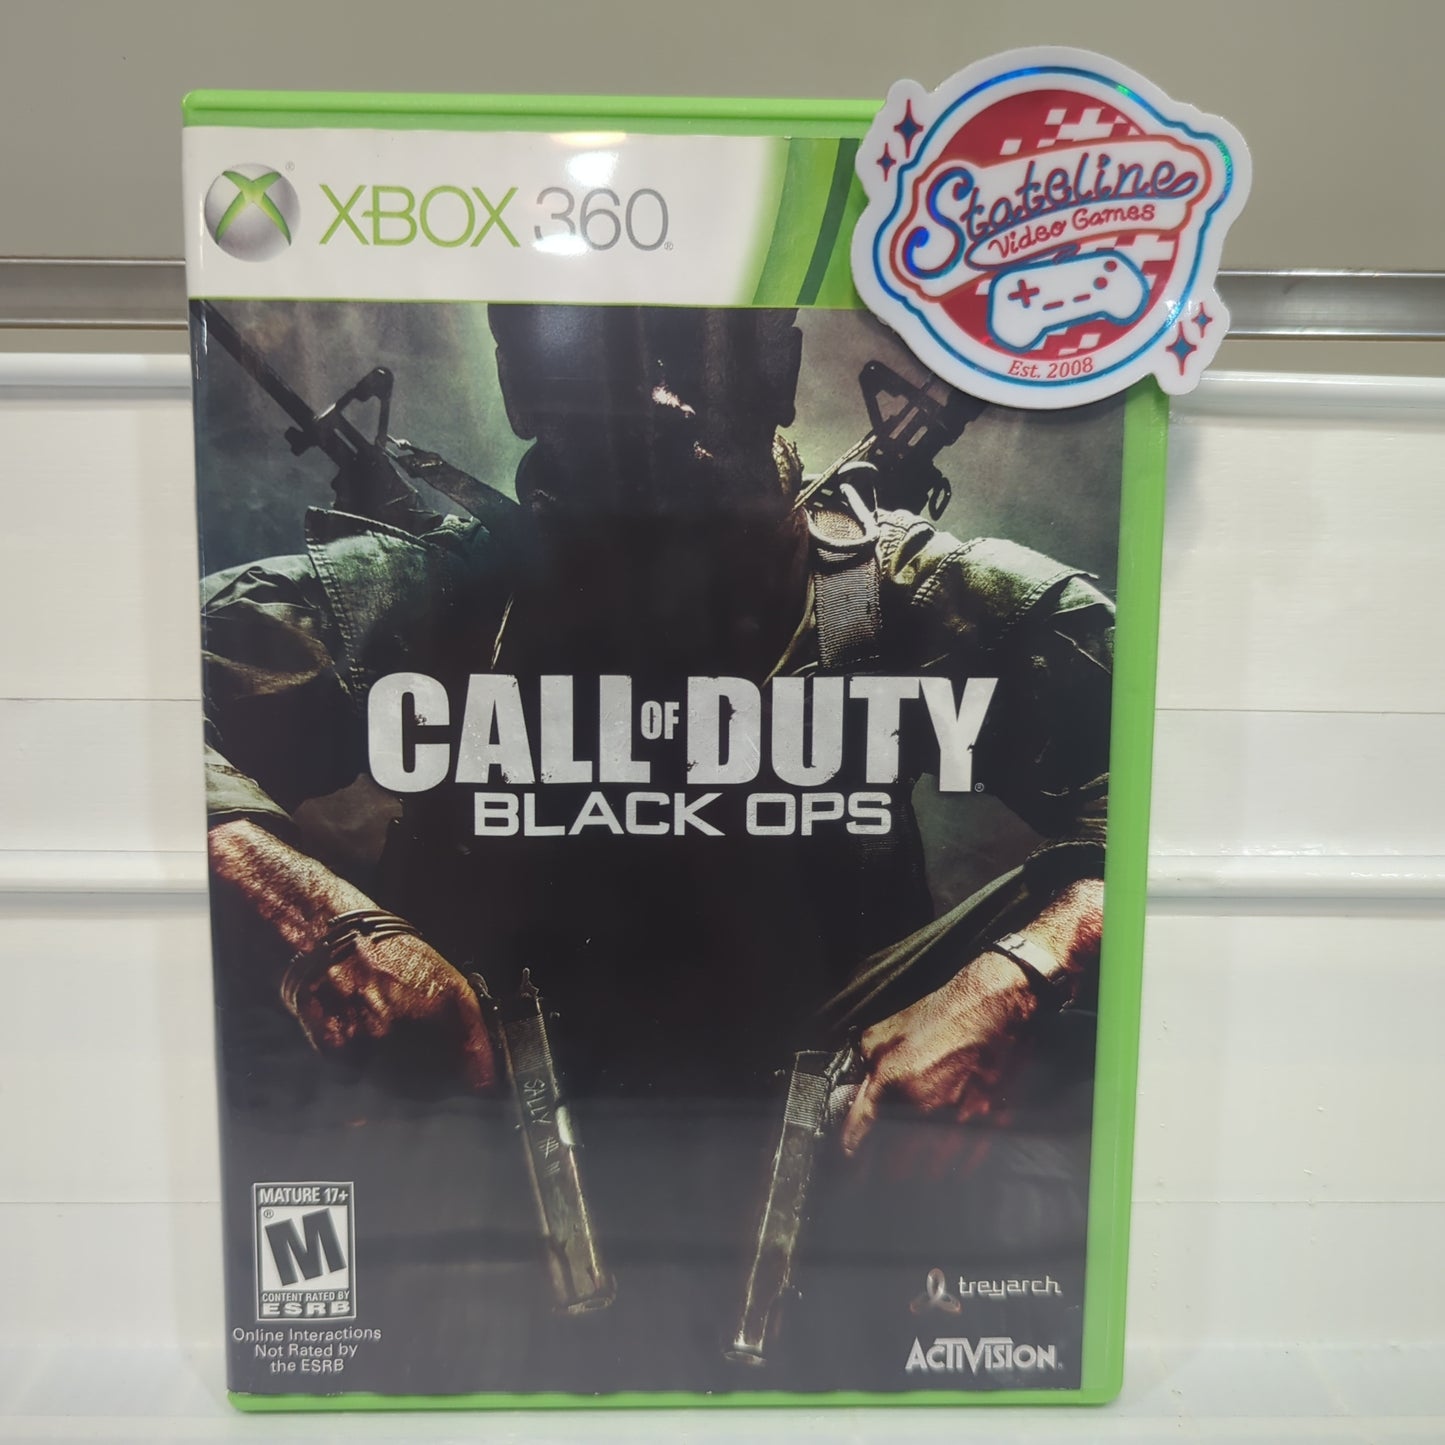 Call of Duty Black Ops - Xbox 360